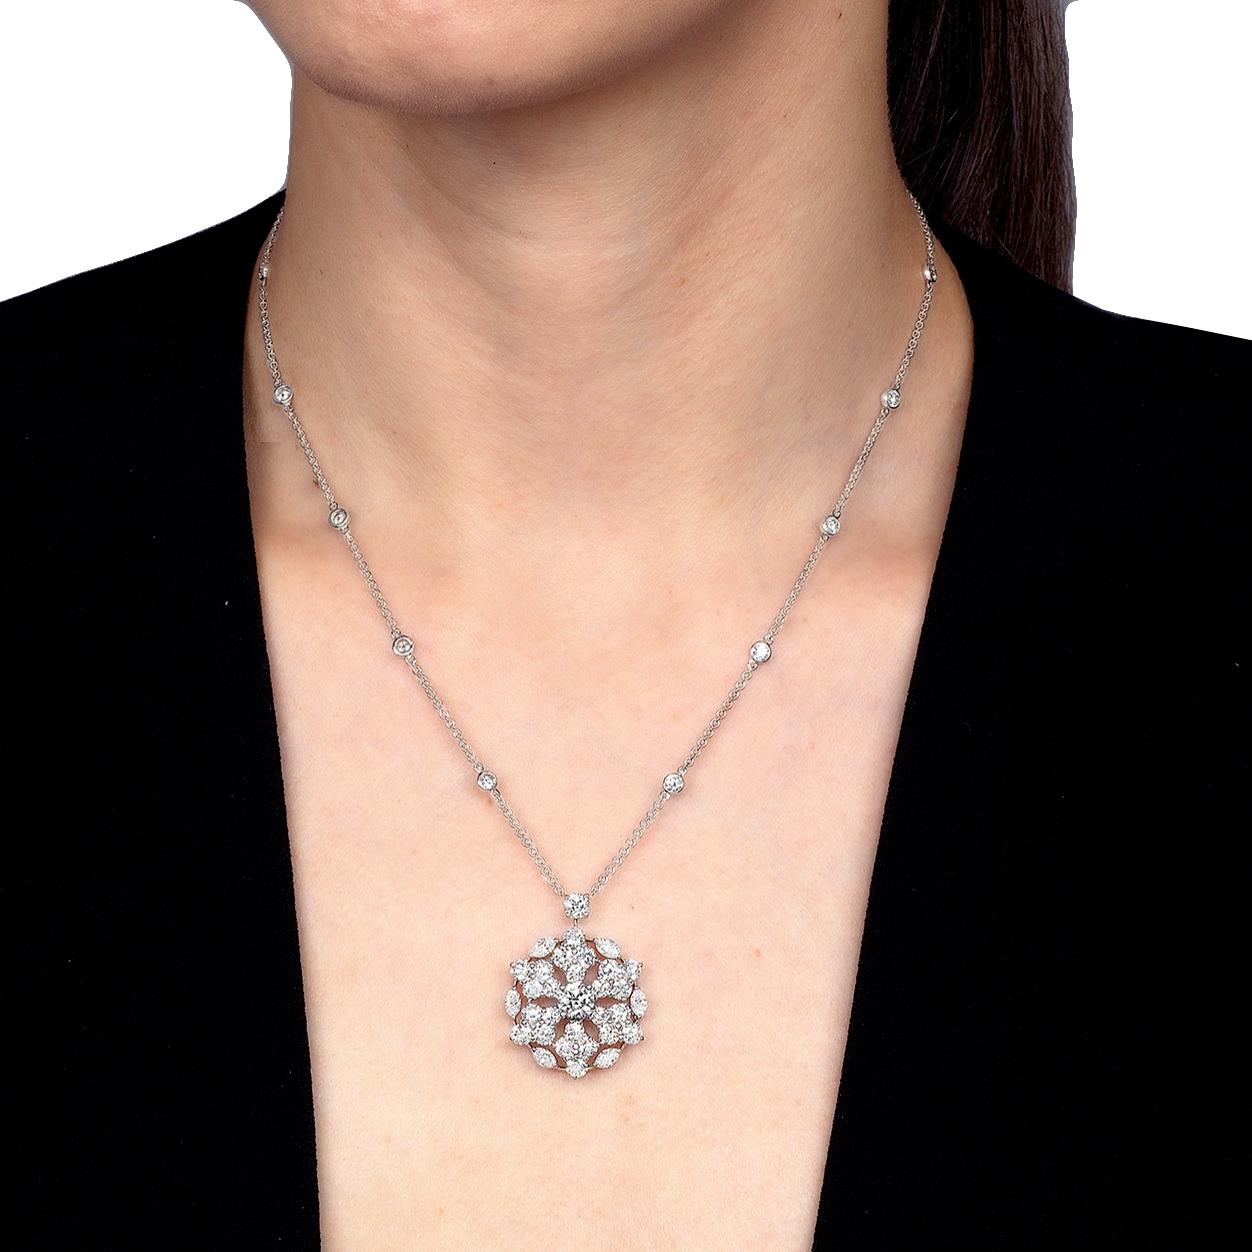 A magnificent diamond pendant necklace by Graff showcasing a Snowflake motif adorned with marquise and round brilliant cut diamonds. Throughout the chain there are diamond stations, the total carat weight measures 6.67ct. The central diamond